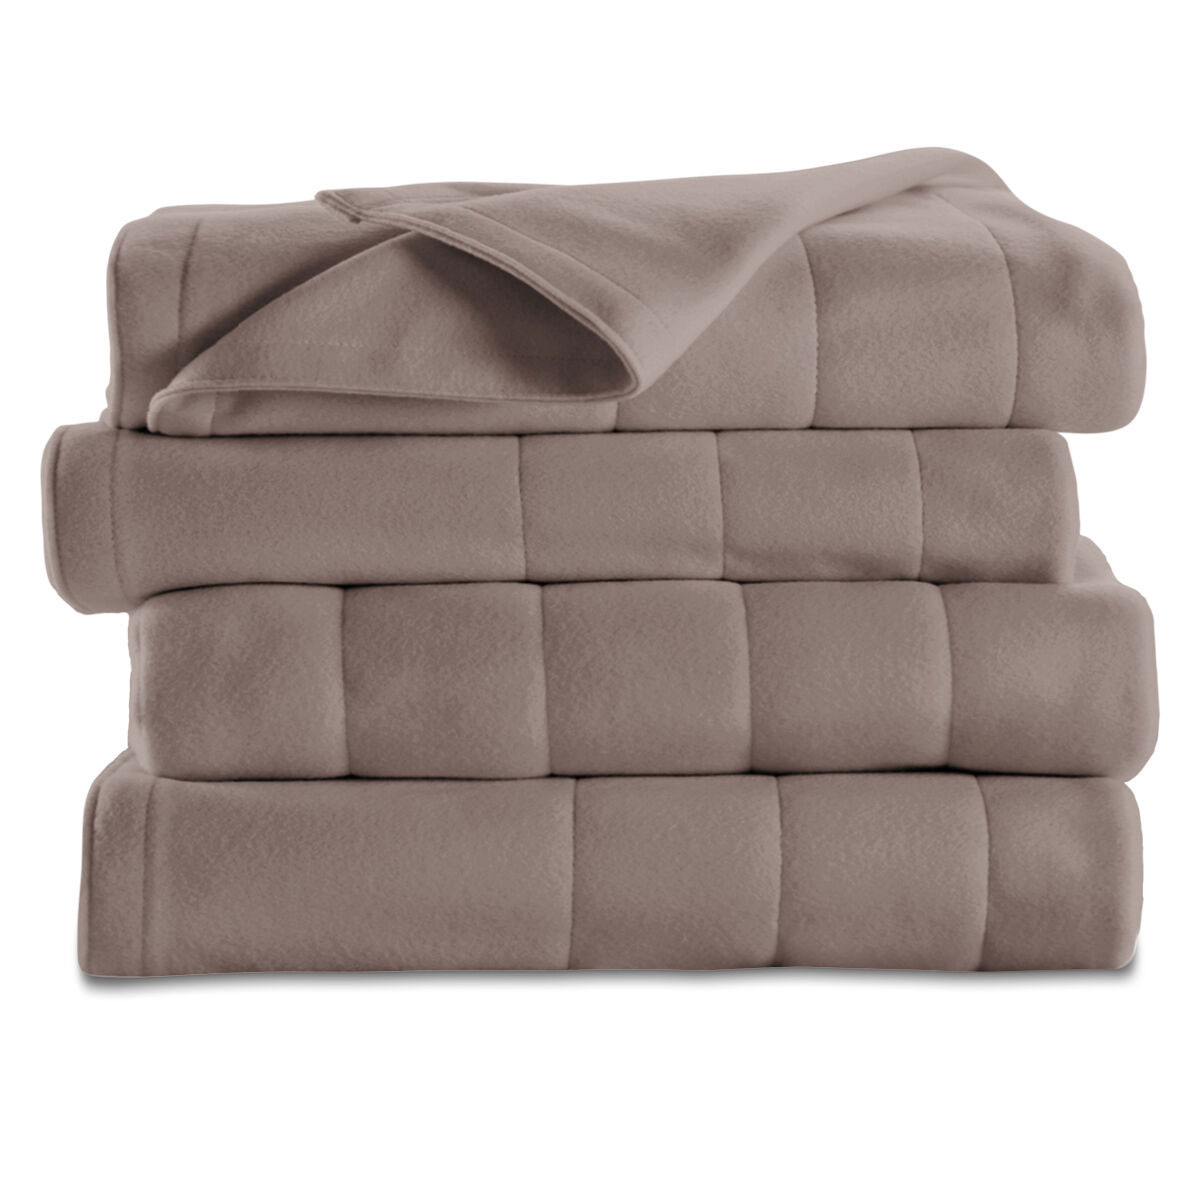 Sunbeam Quilted Fleece Electric Heated Warming Blanket G9